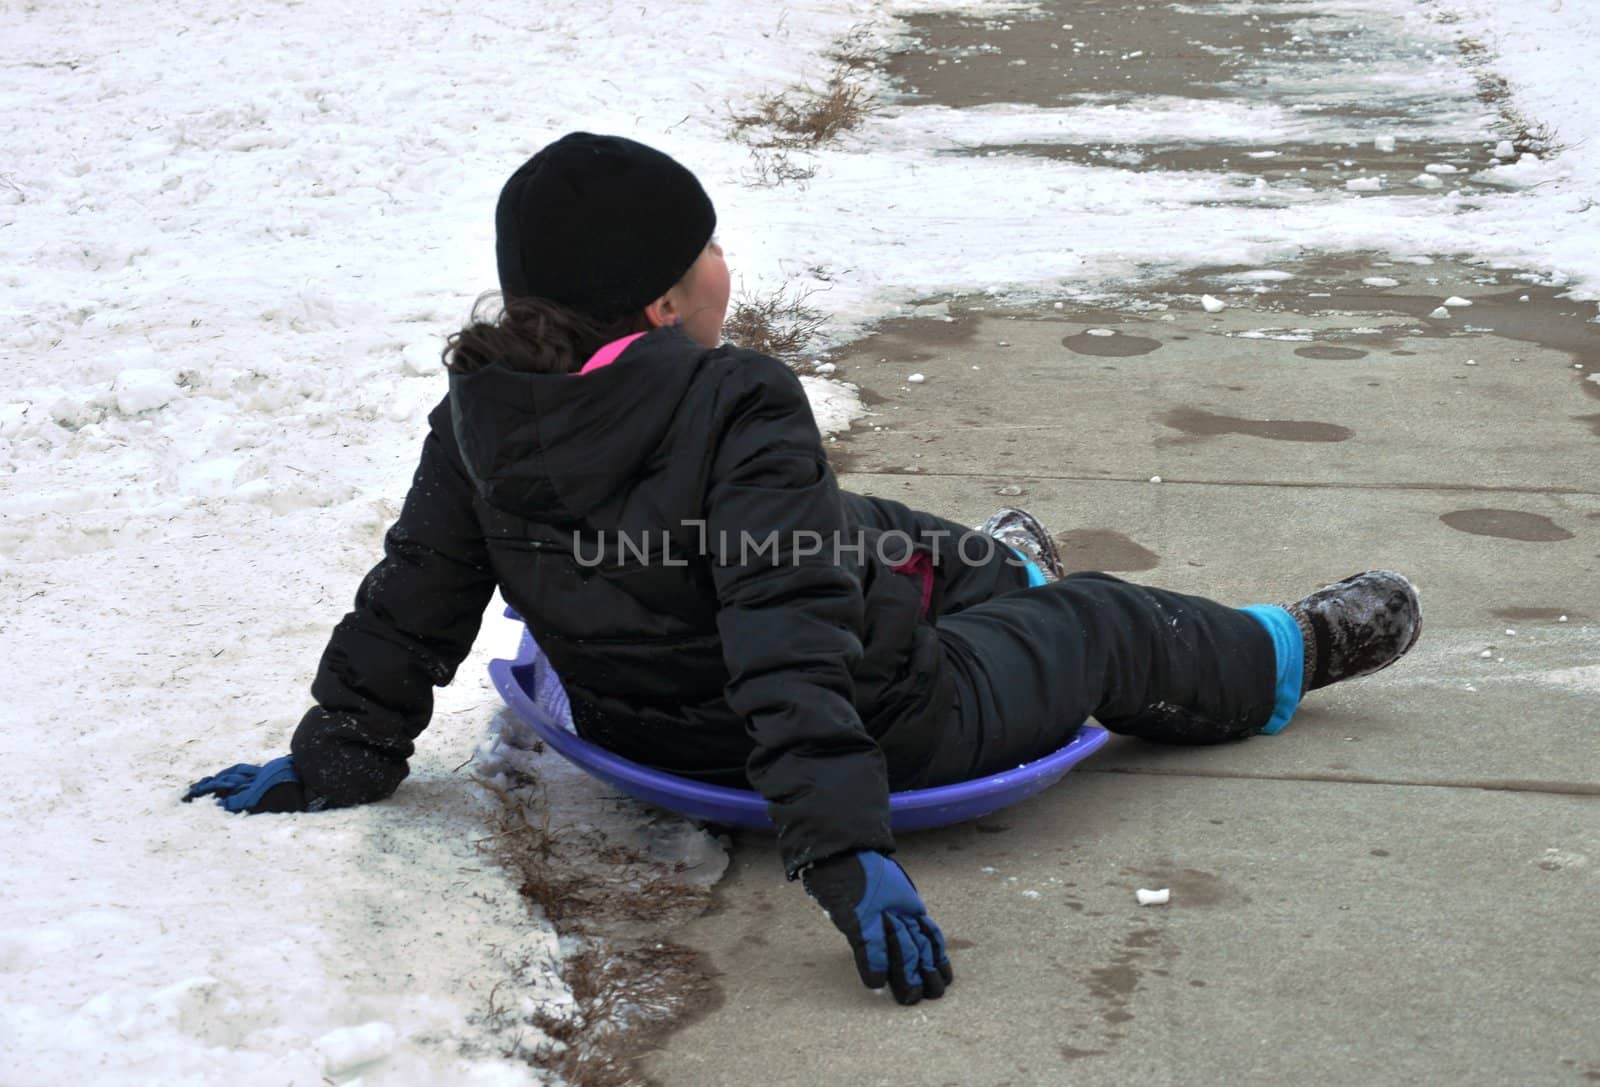 sledding at the bottom of the hill by RefocusPhoto